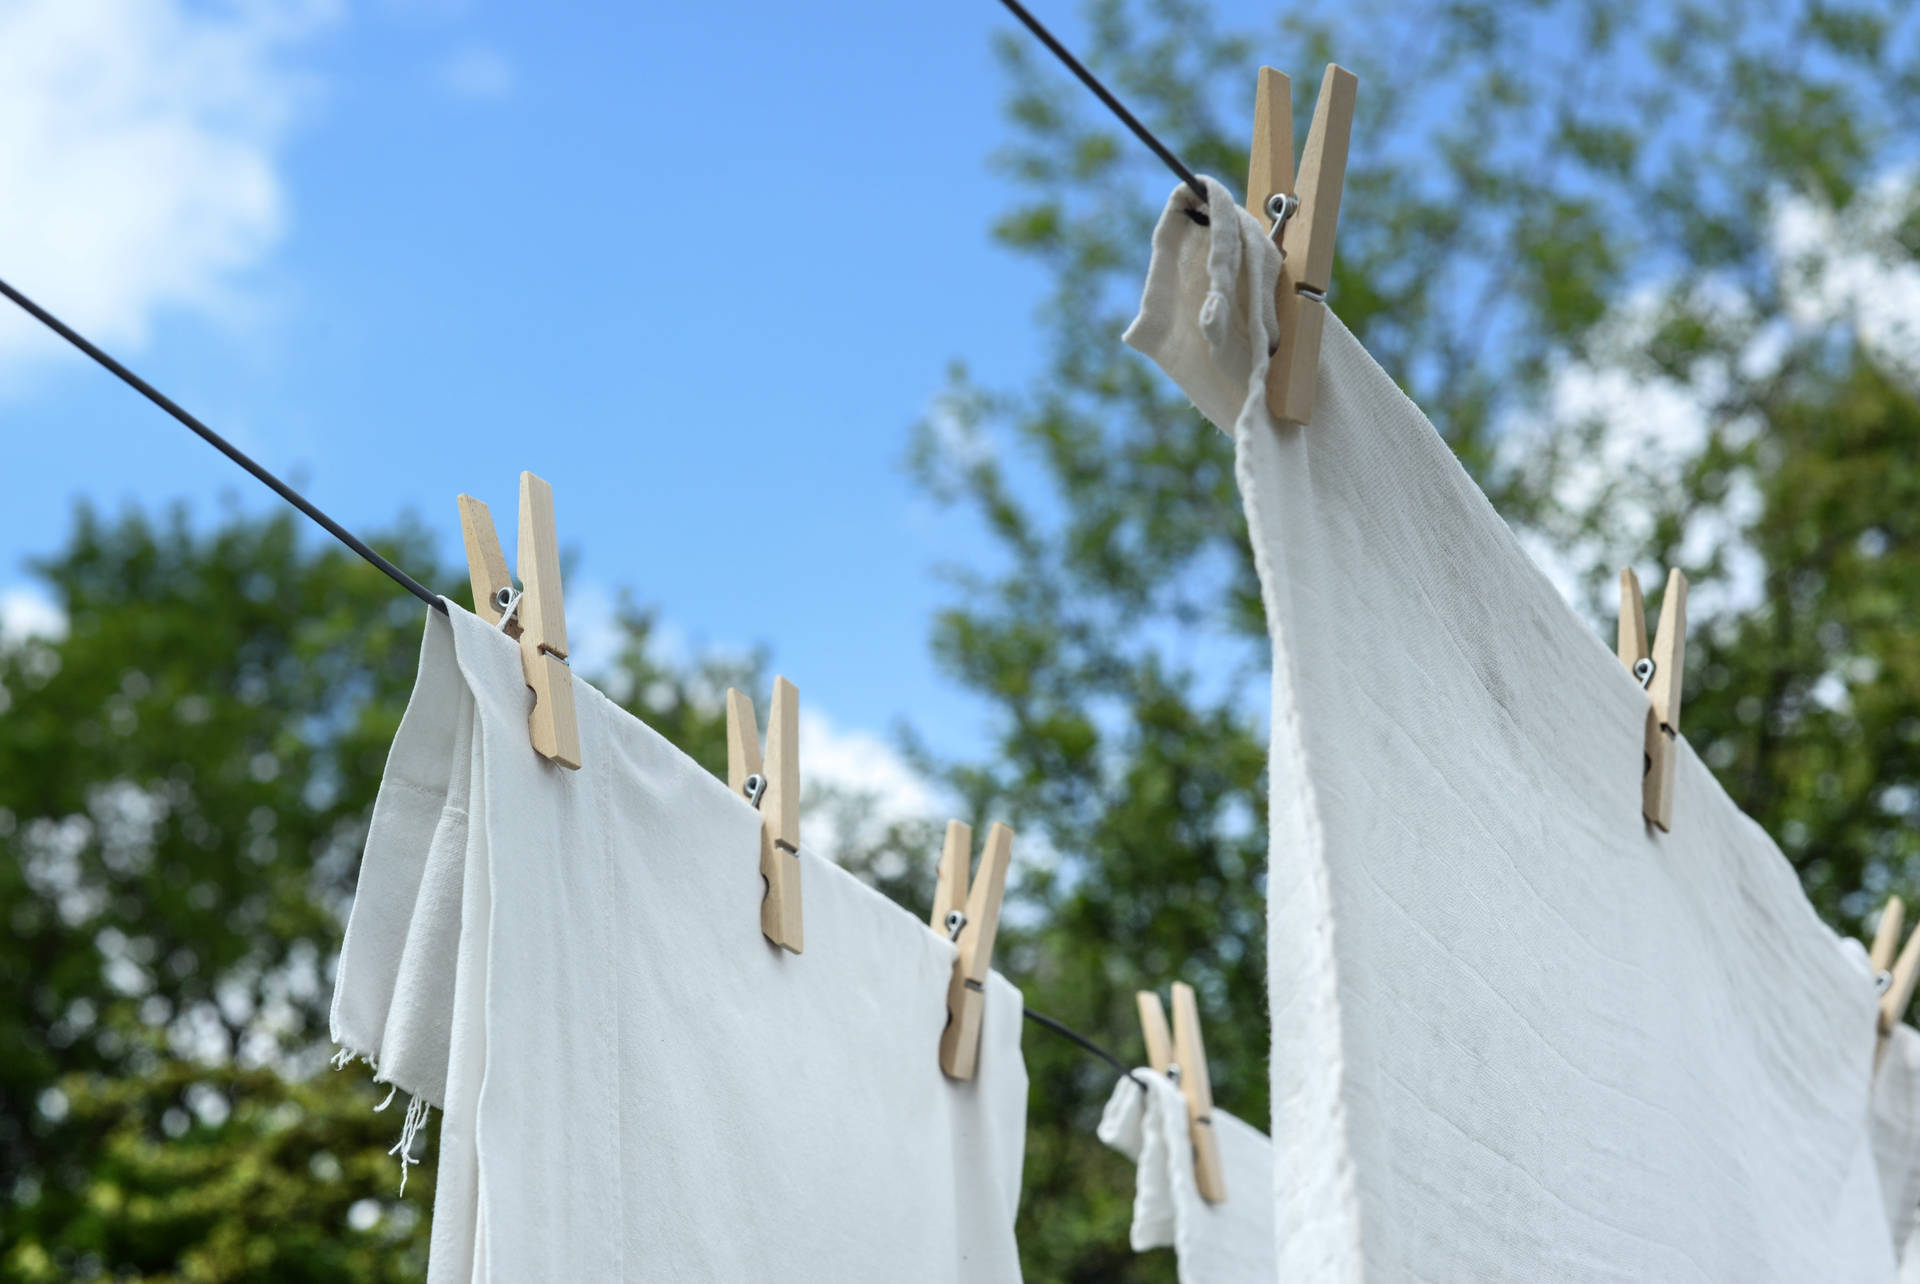 Clothes Line Under The Sun Background